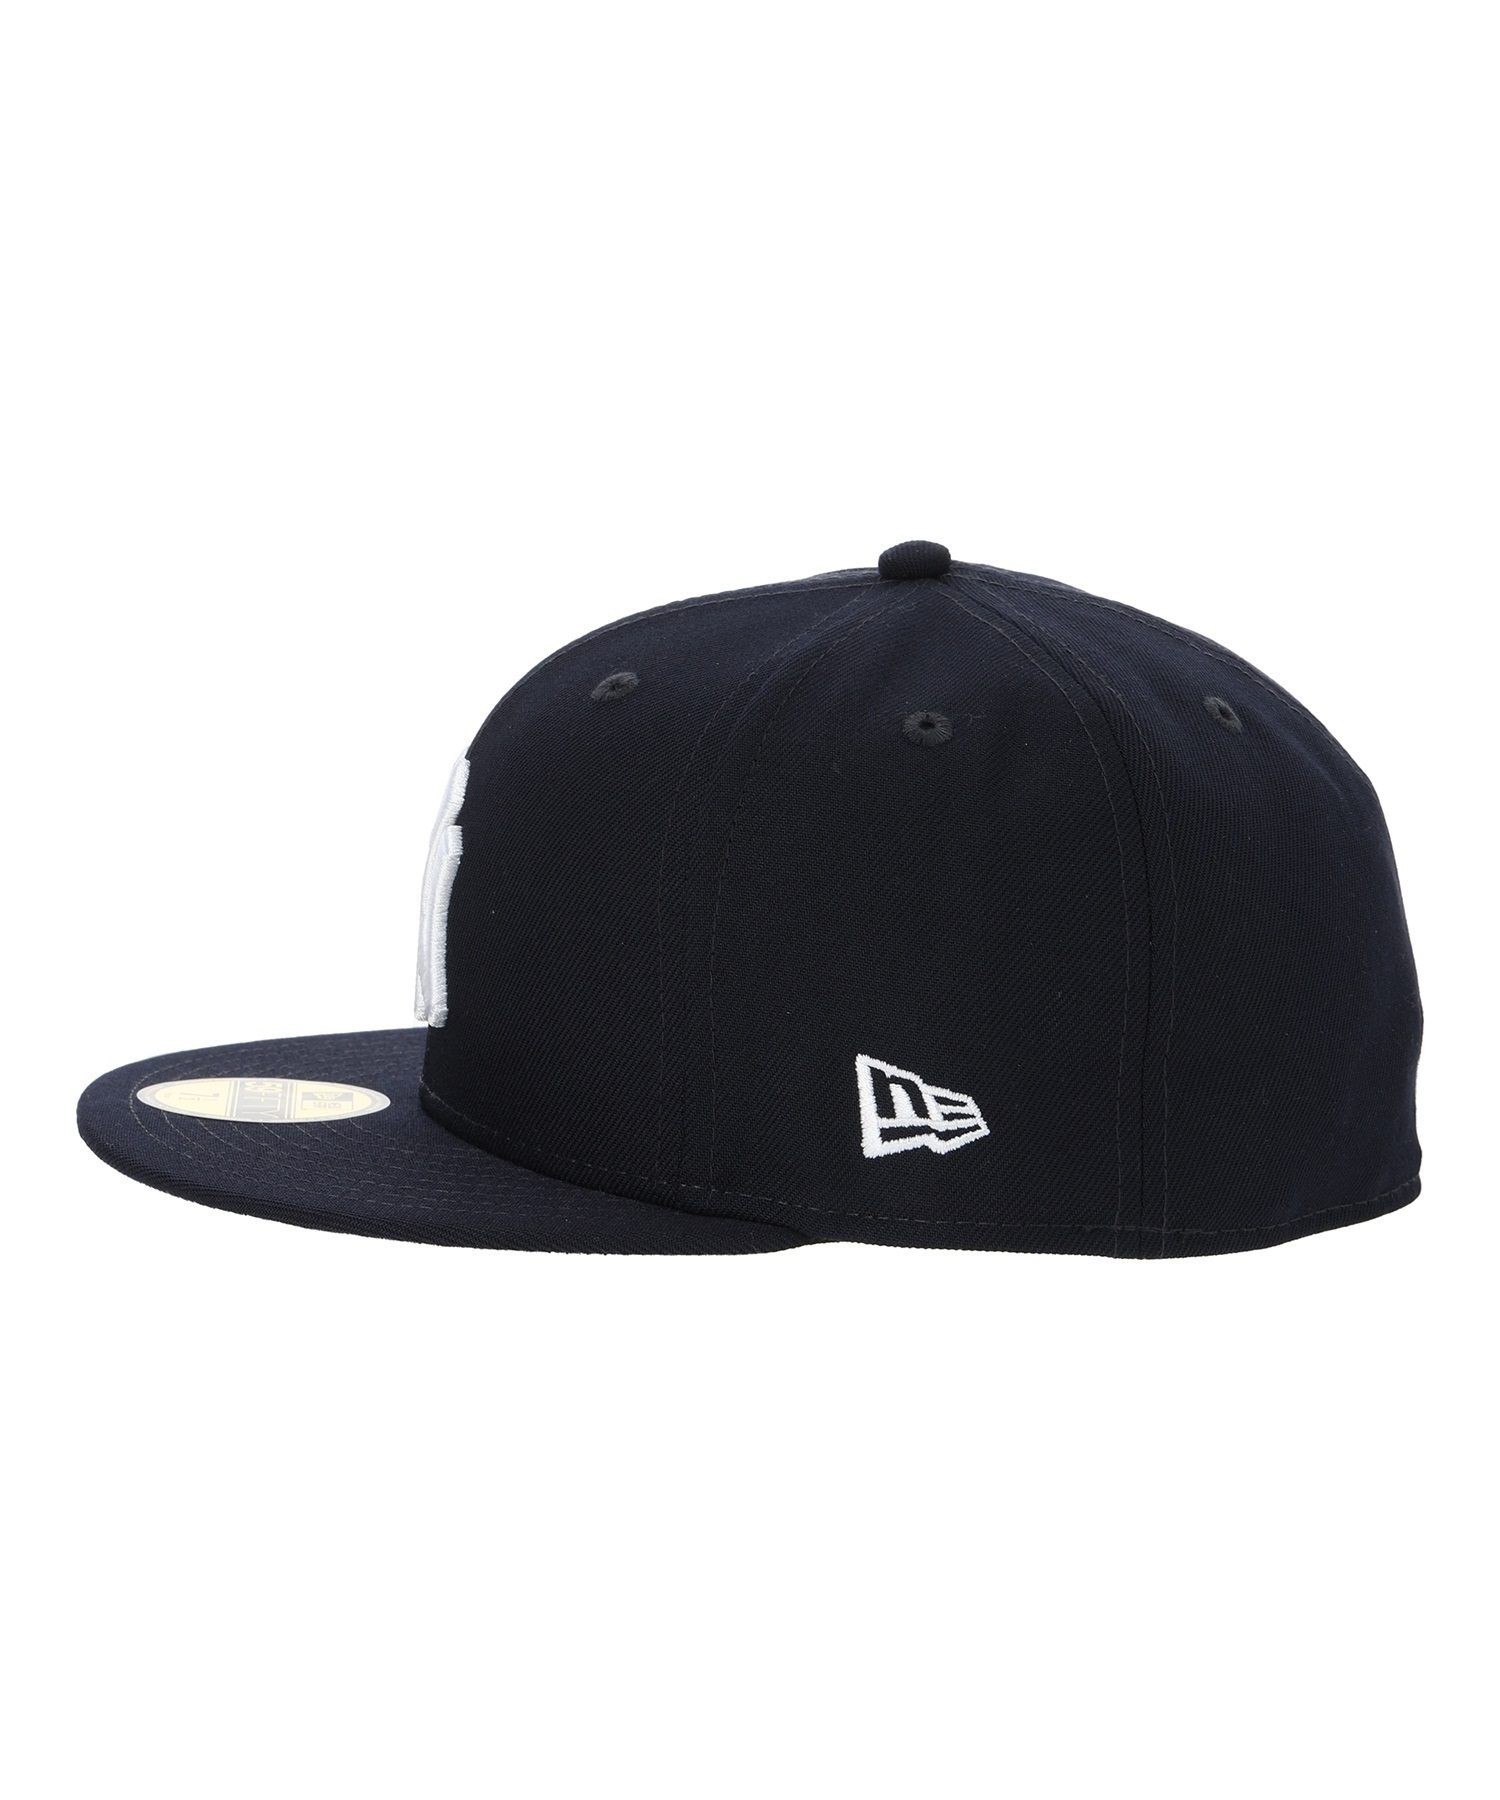 NEW ERA/ニューエラ 59FIFTY ニューヨーク・ヤンキース STATE FLOWERS 14109881 キャップ(NVY-7)